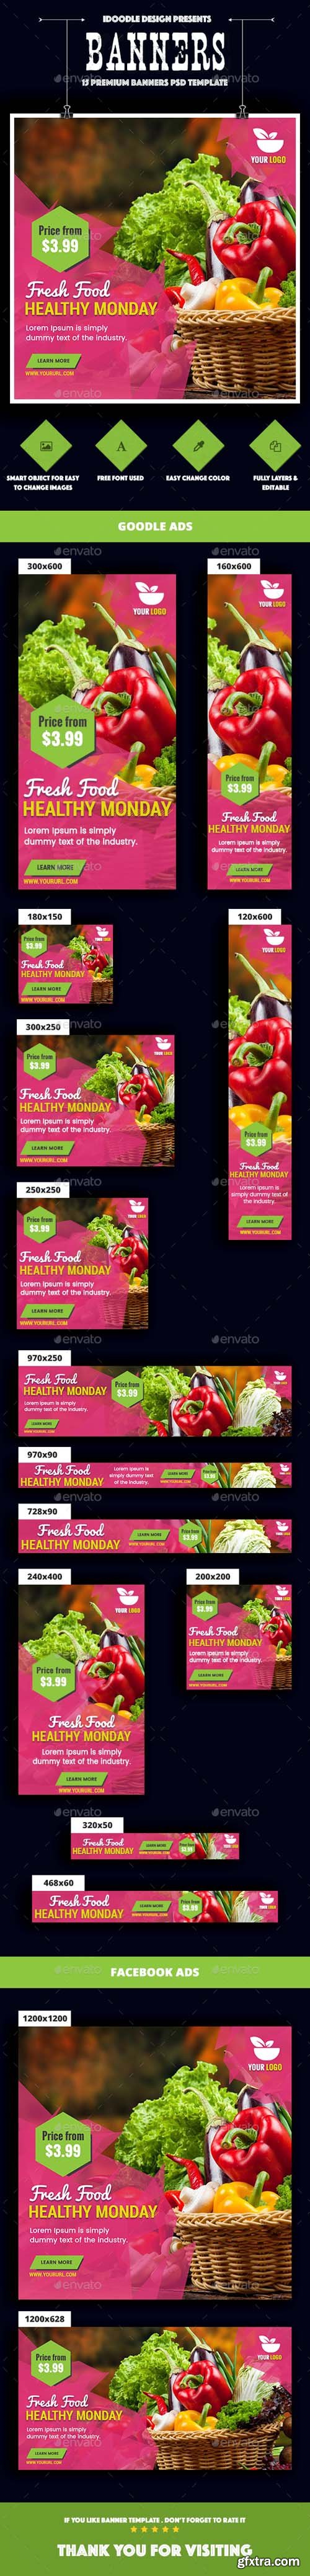 GR - Food & Restaurant Banners Ad 20152854